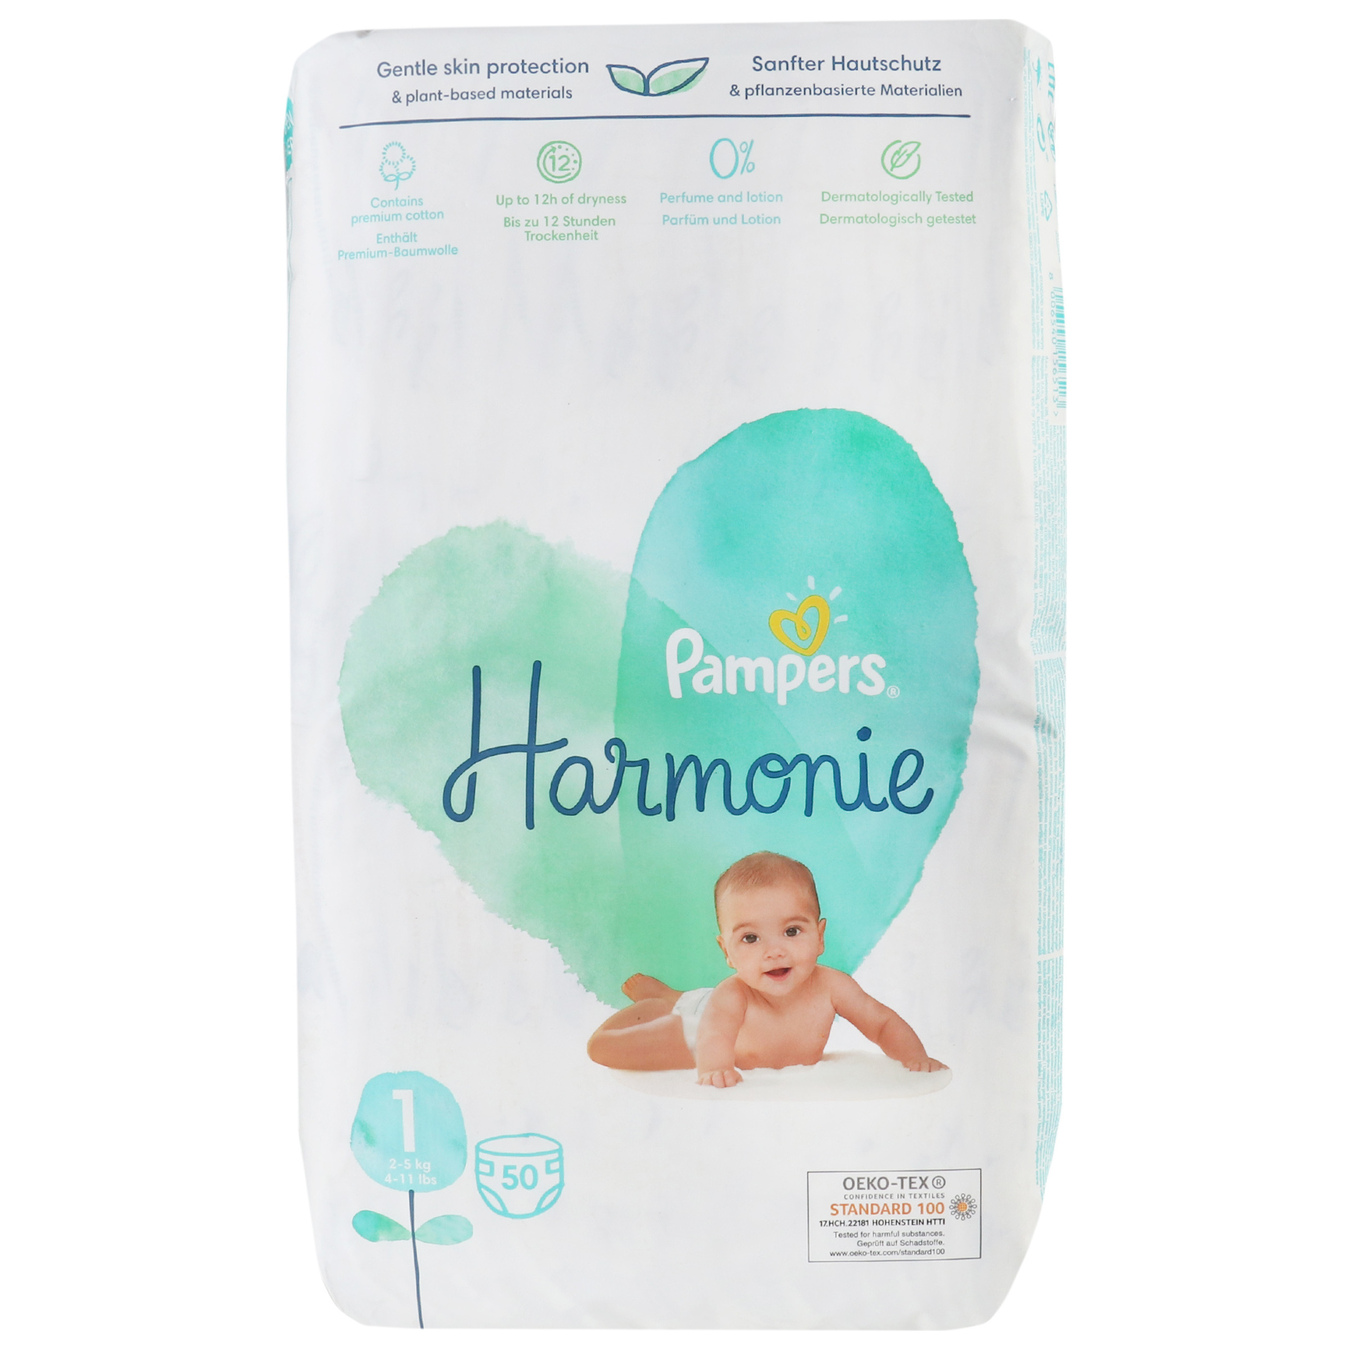 Baby diapers Pampers Economy Harmonie Newborn disposable 2-5 kg 50 pcs